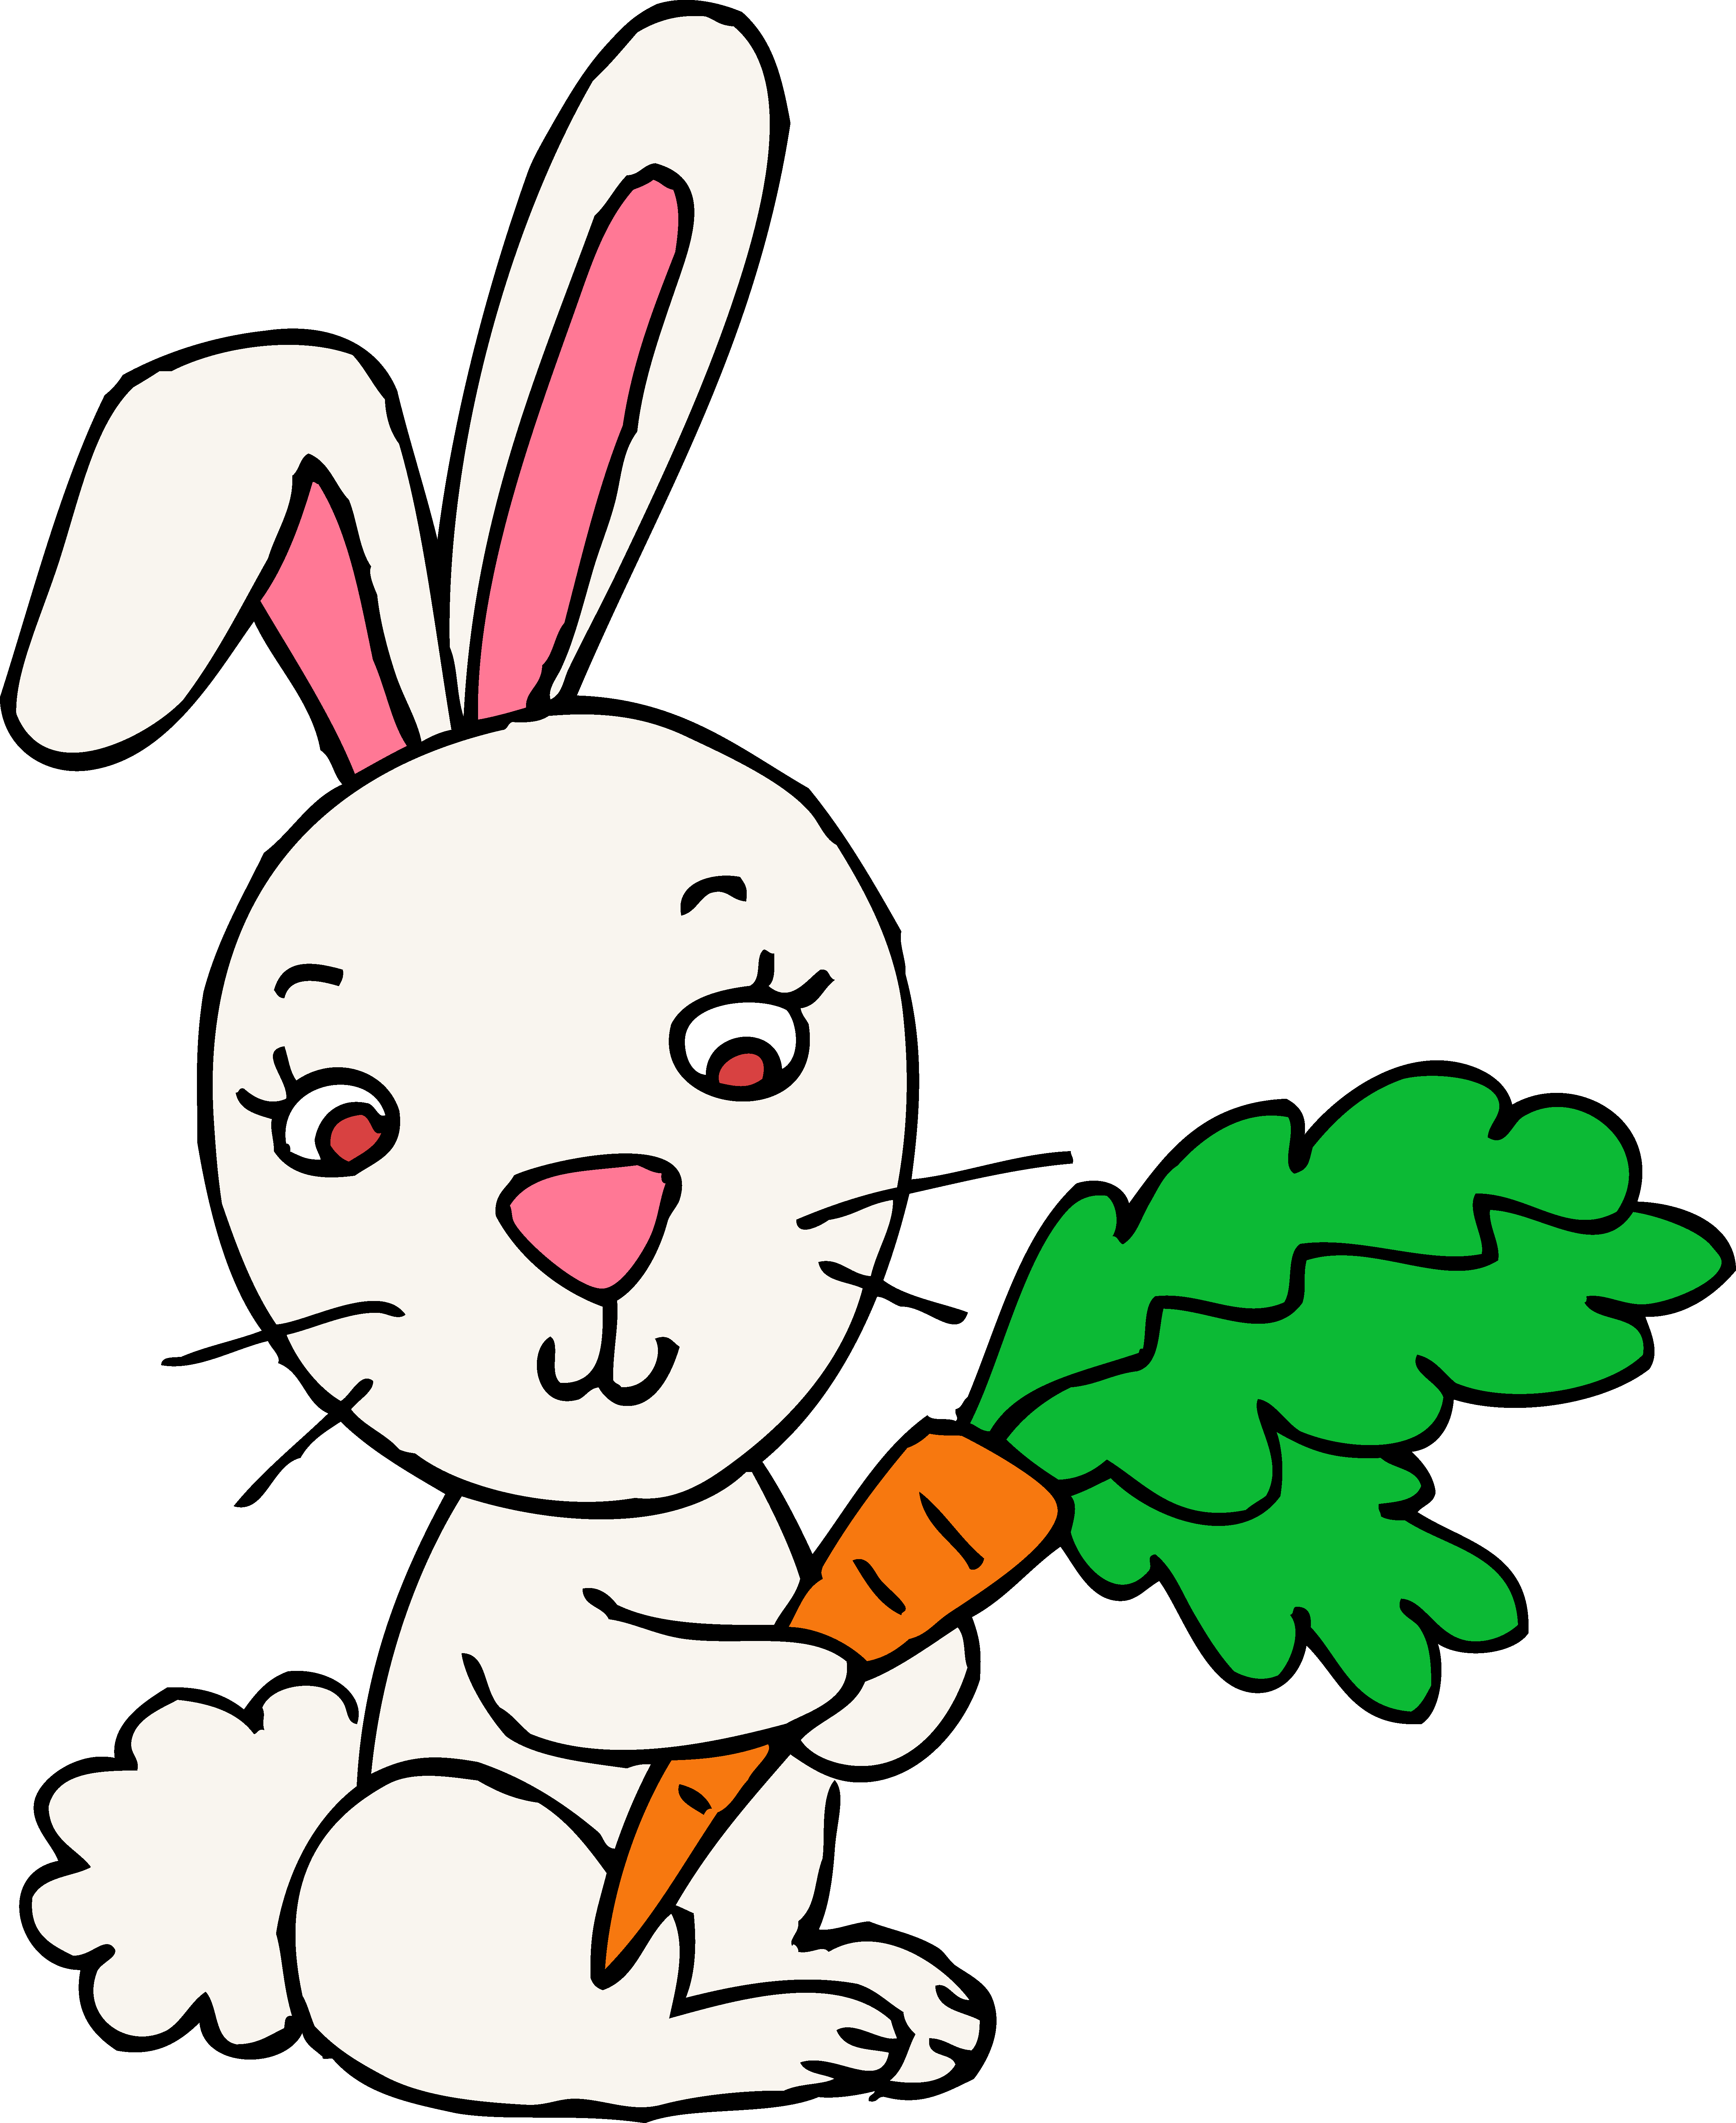 Bunny Clipart Black And White | Clipart Panda - Free Clipart Images